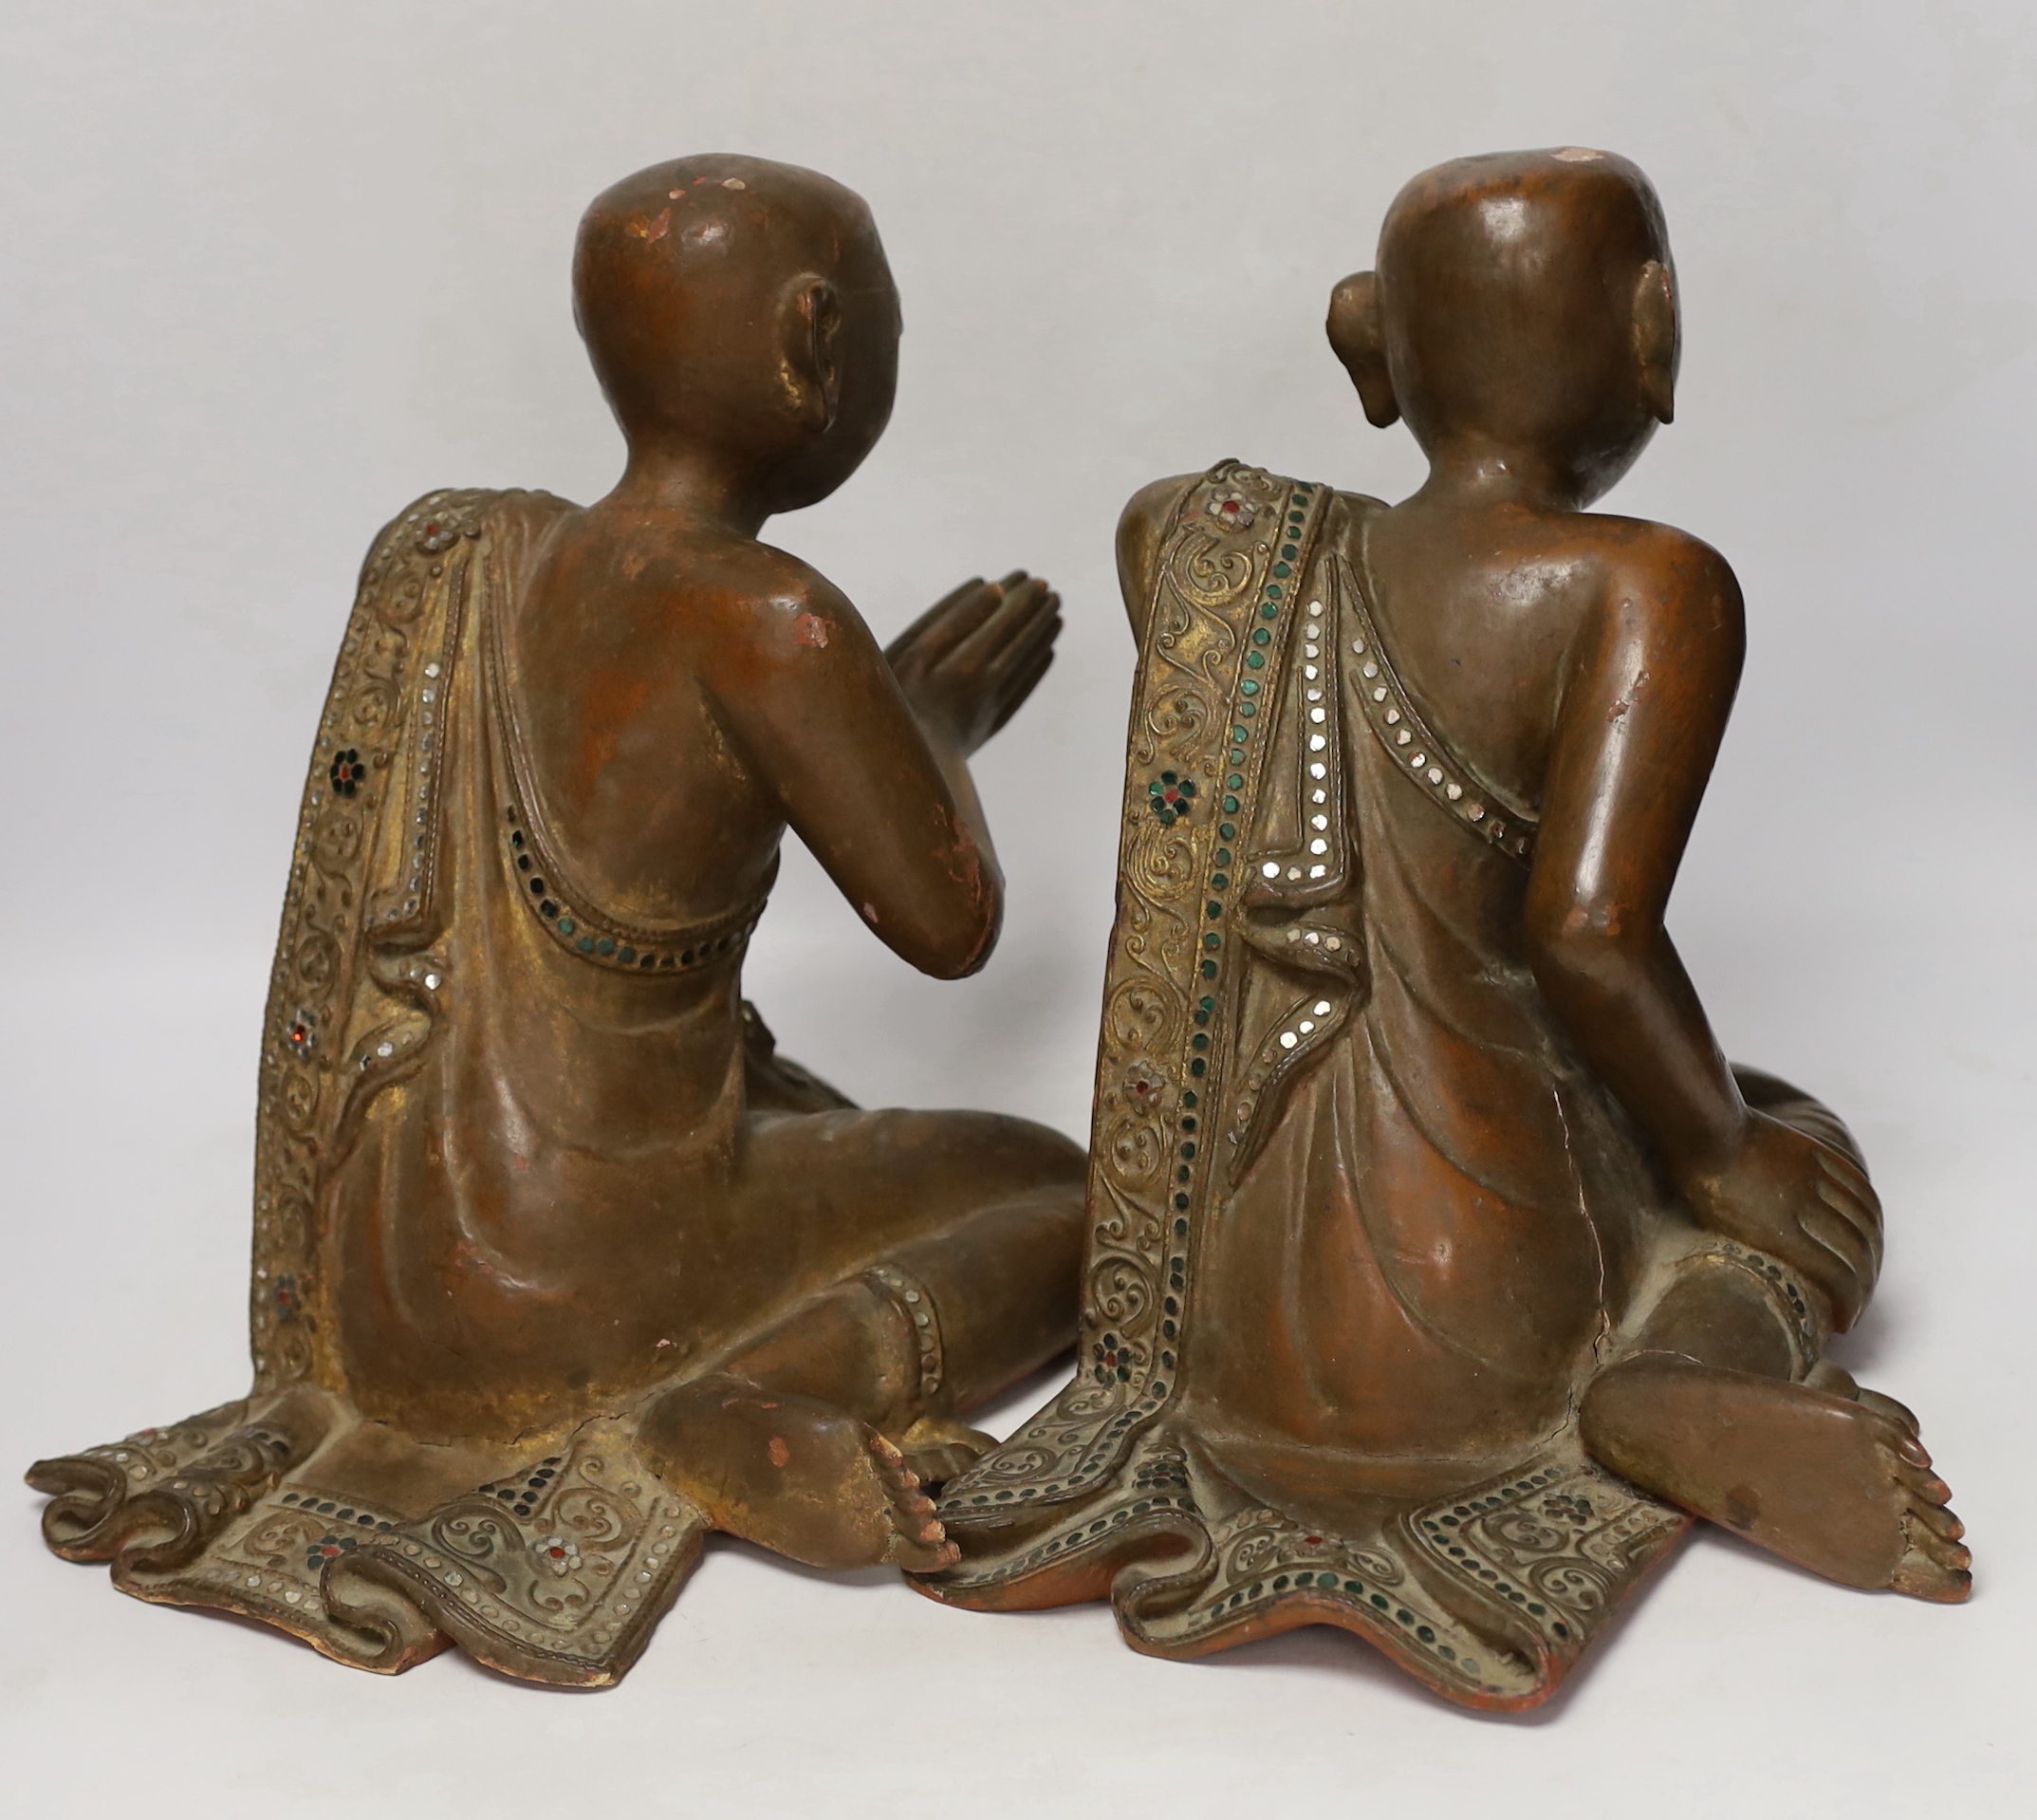 Two papier-mâché and lacquer Thai praying monks, 29.5cm high - Image 3 of 4